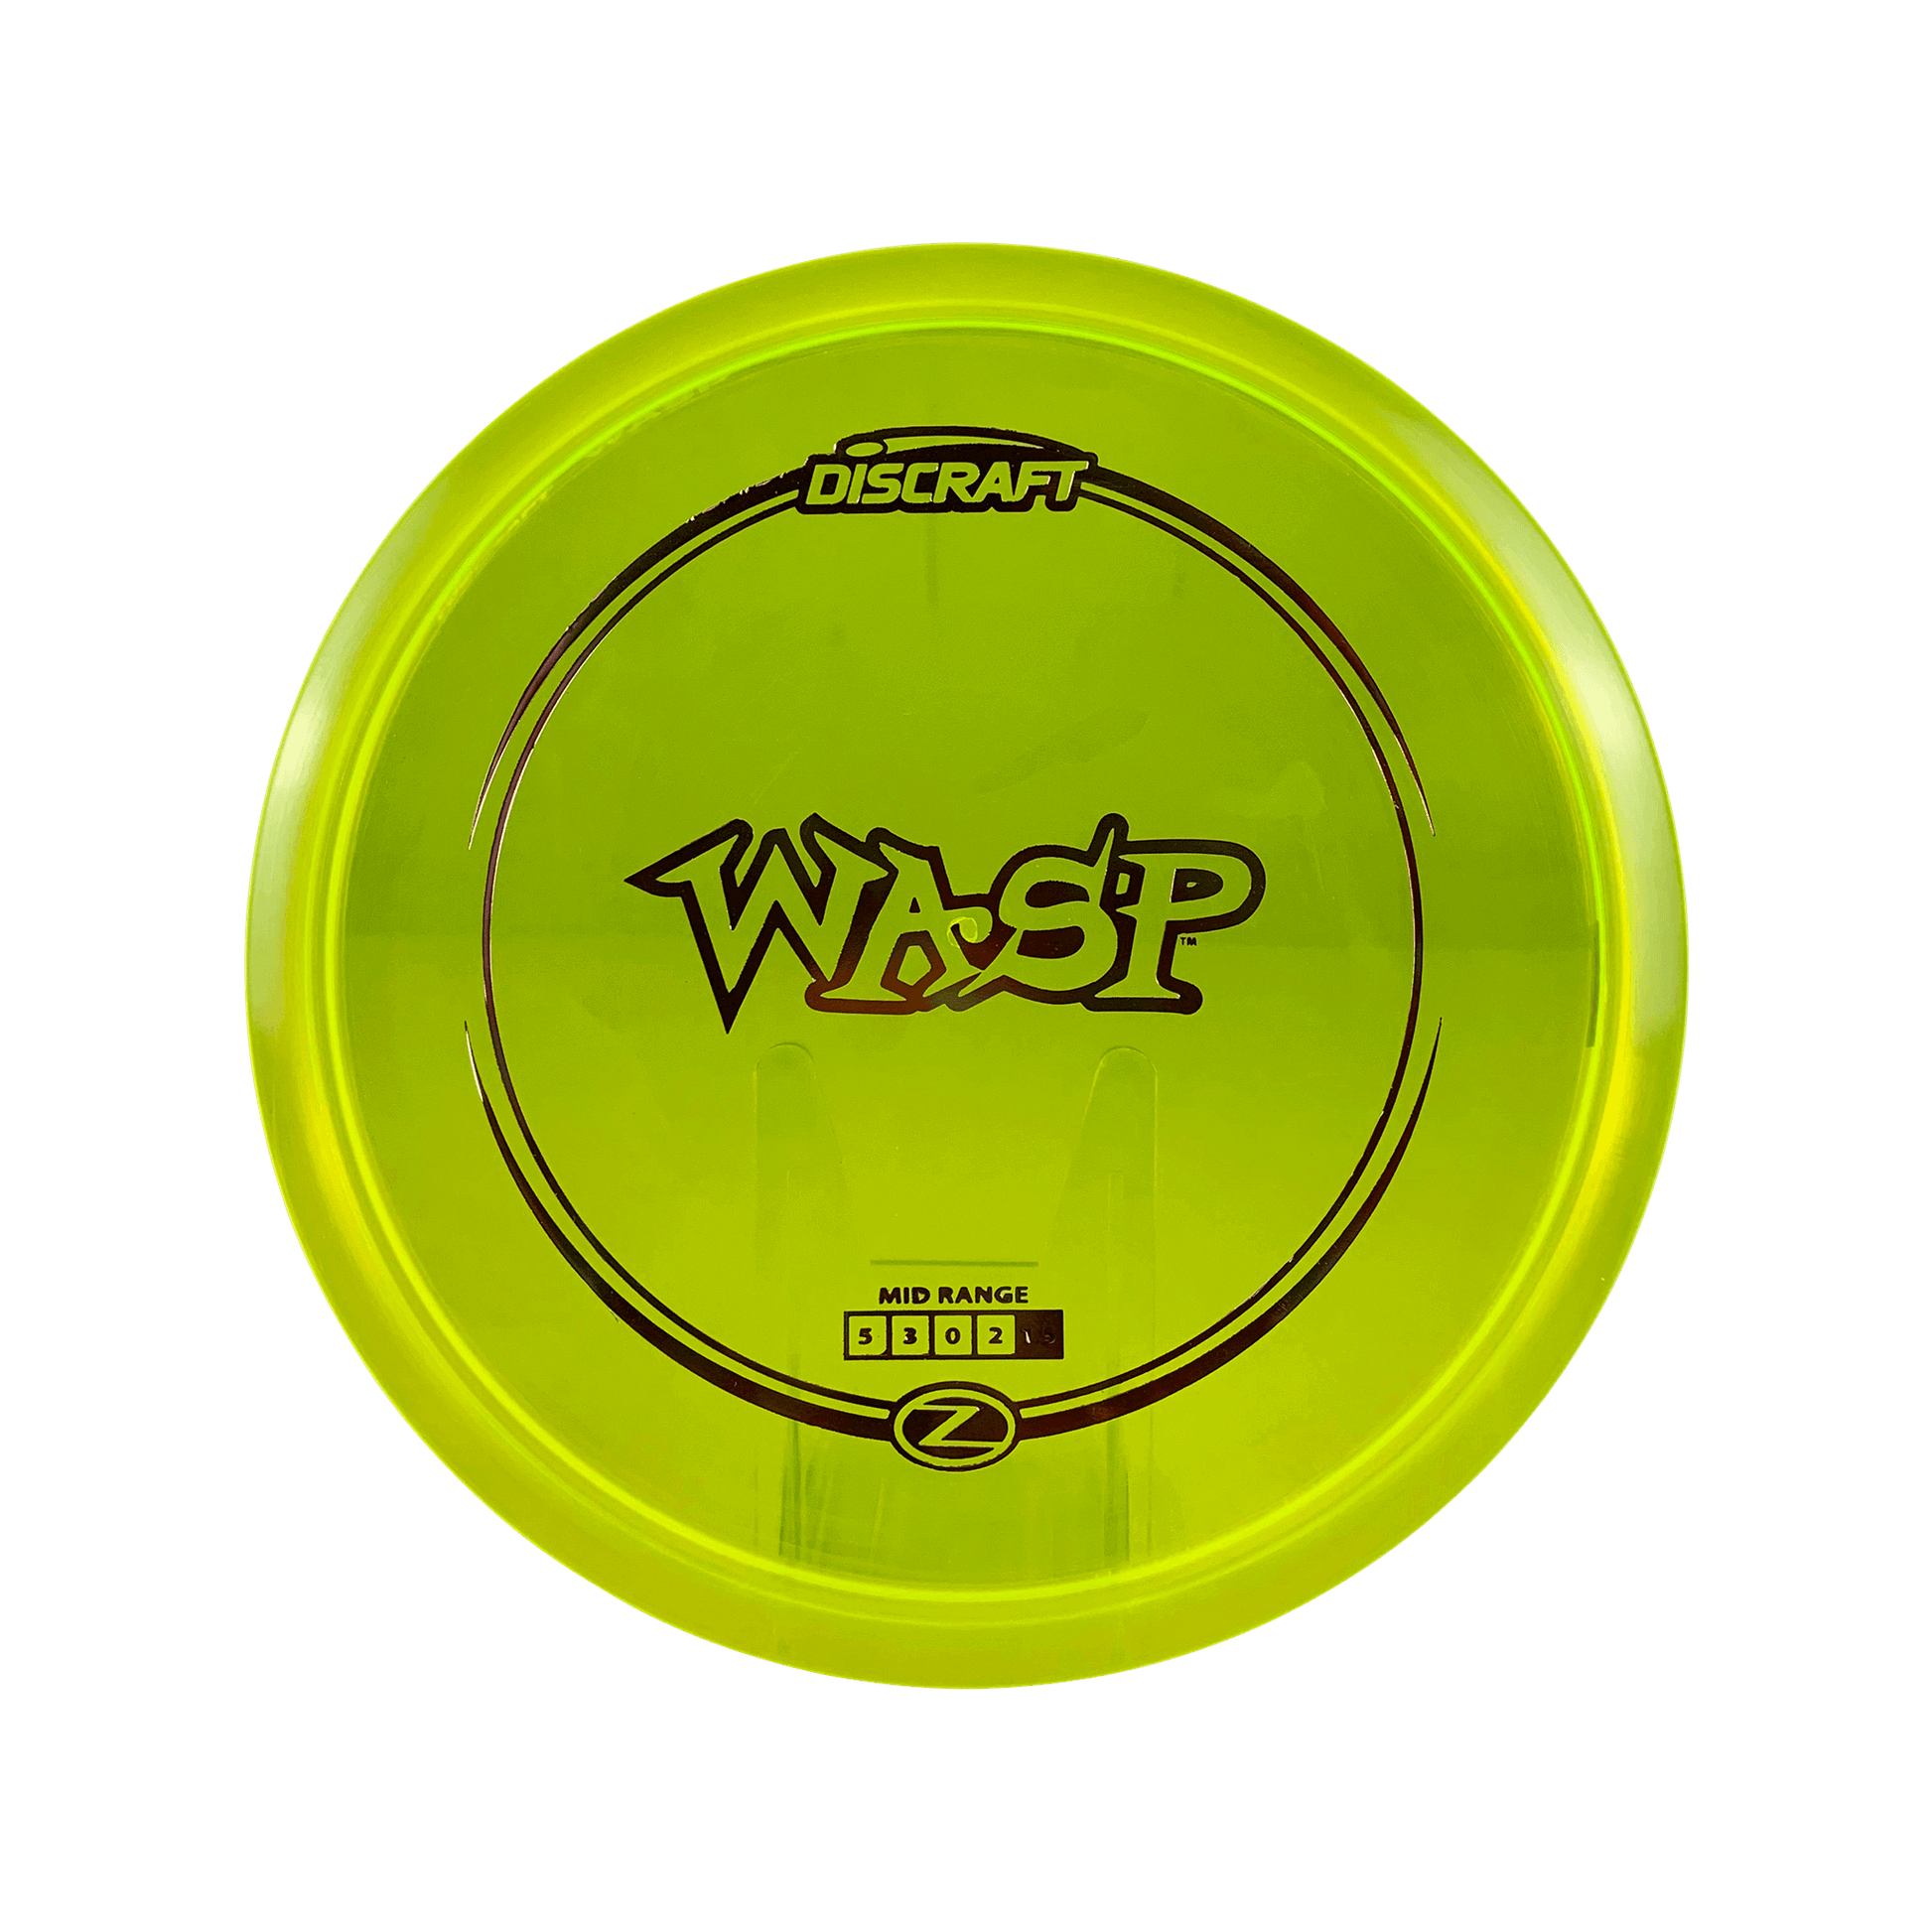 Z Wasp Disc Discraft yellow 175 